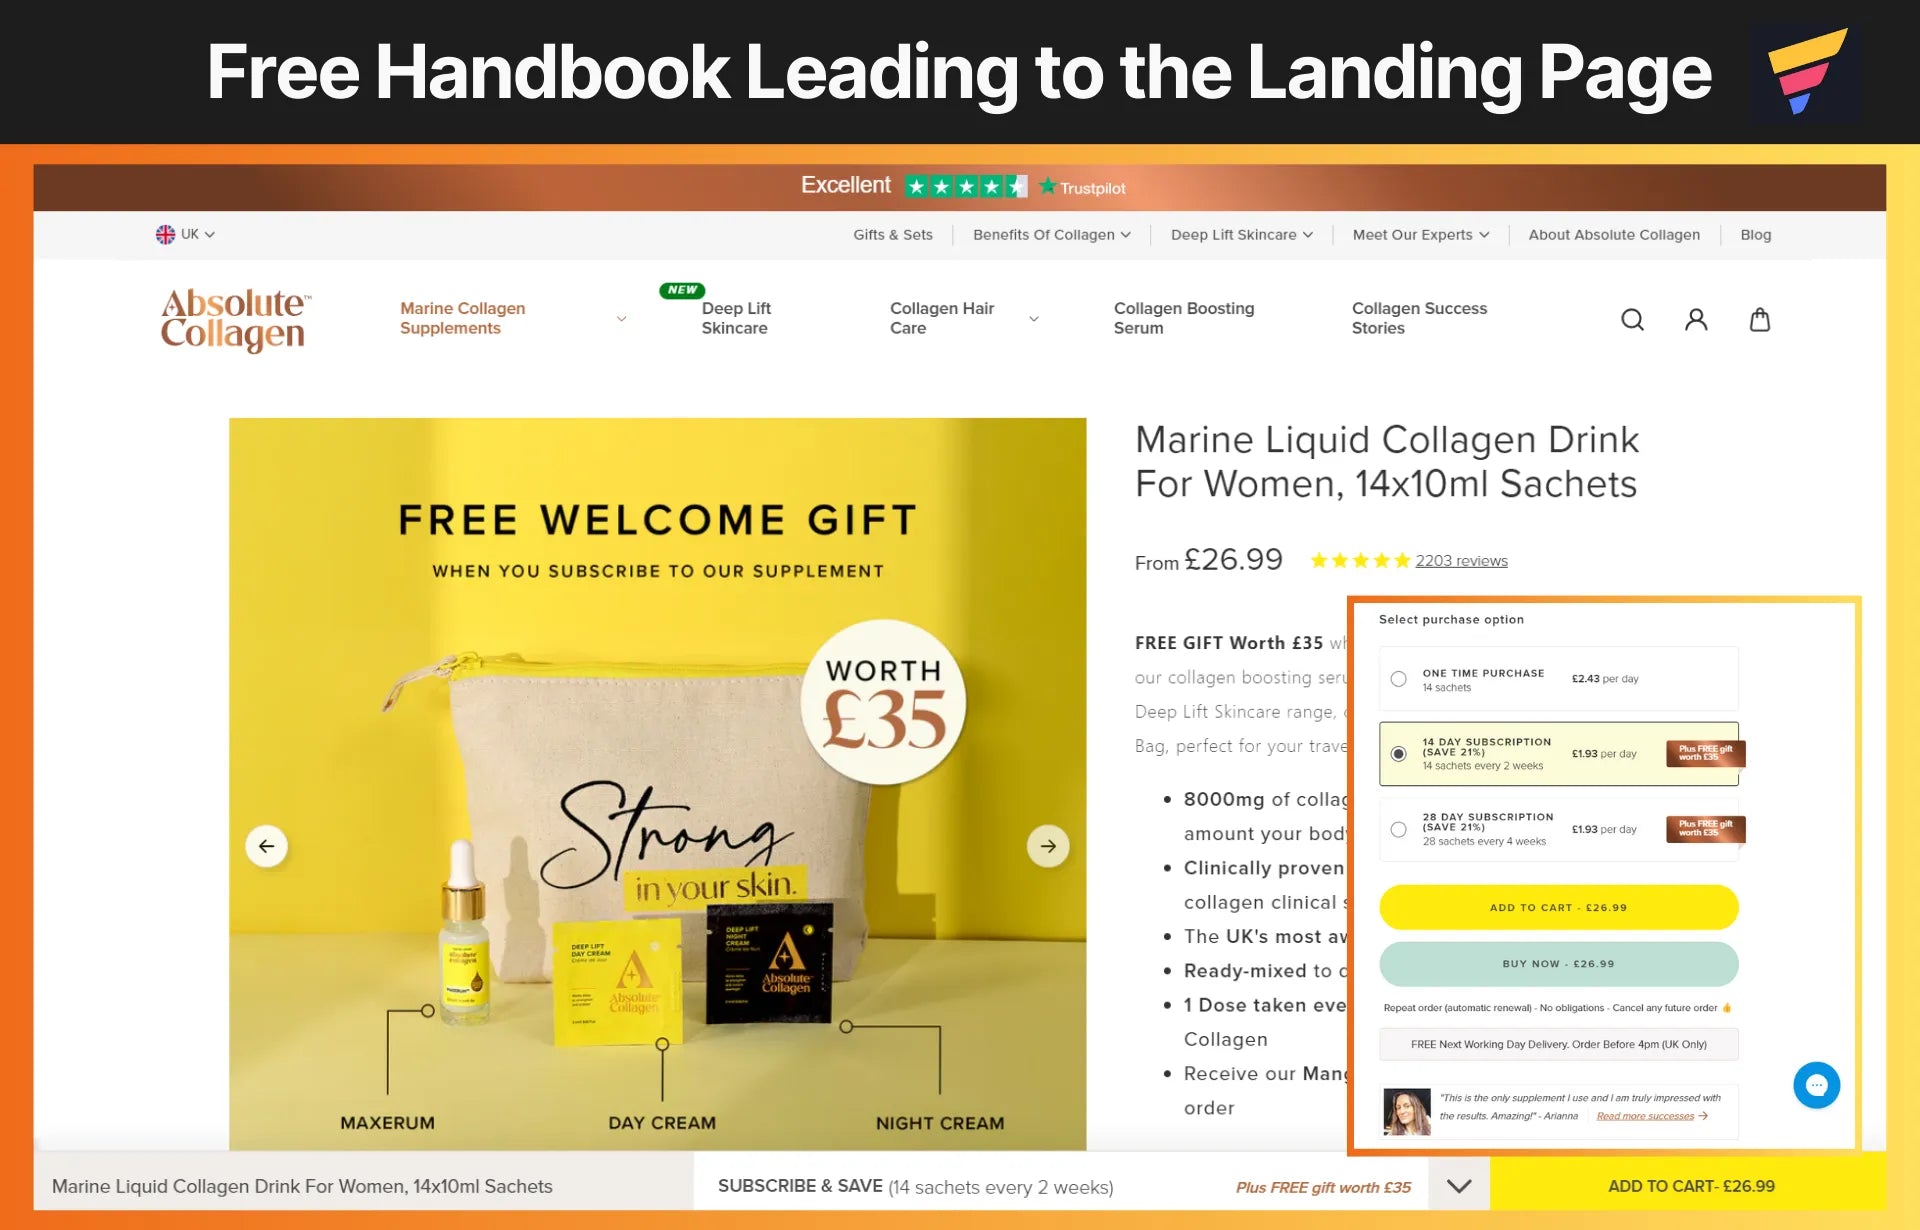 Free Handbook Leading to the Landing Page